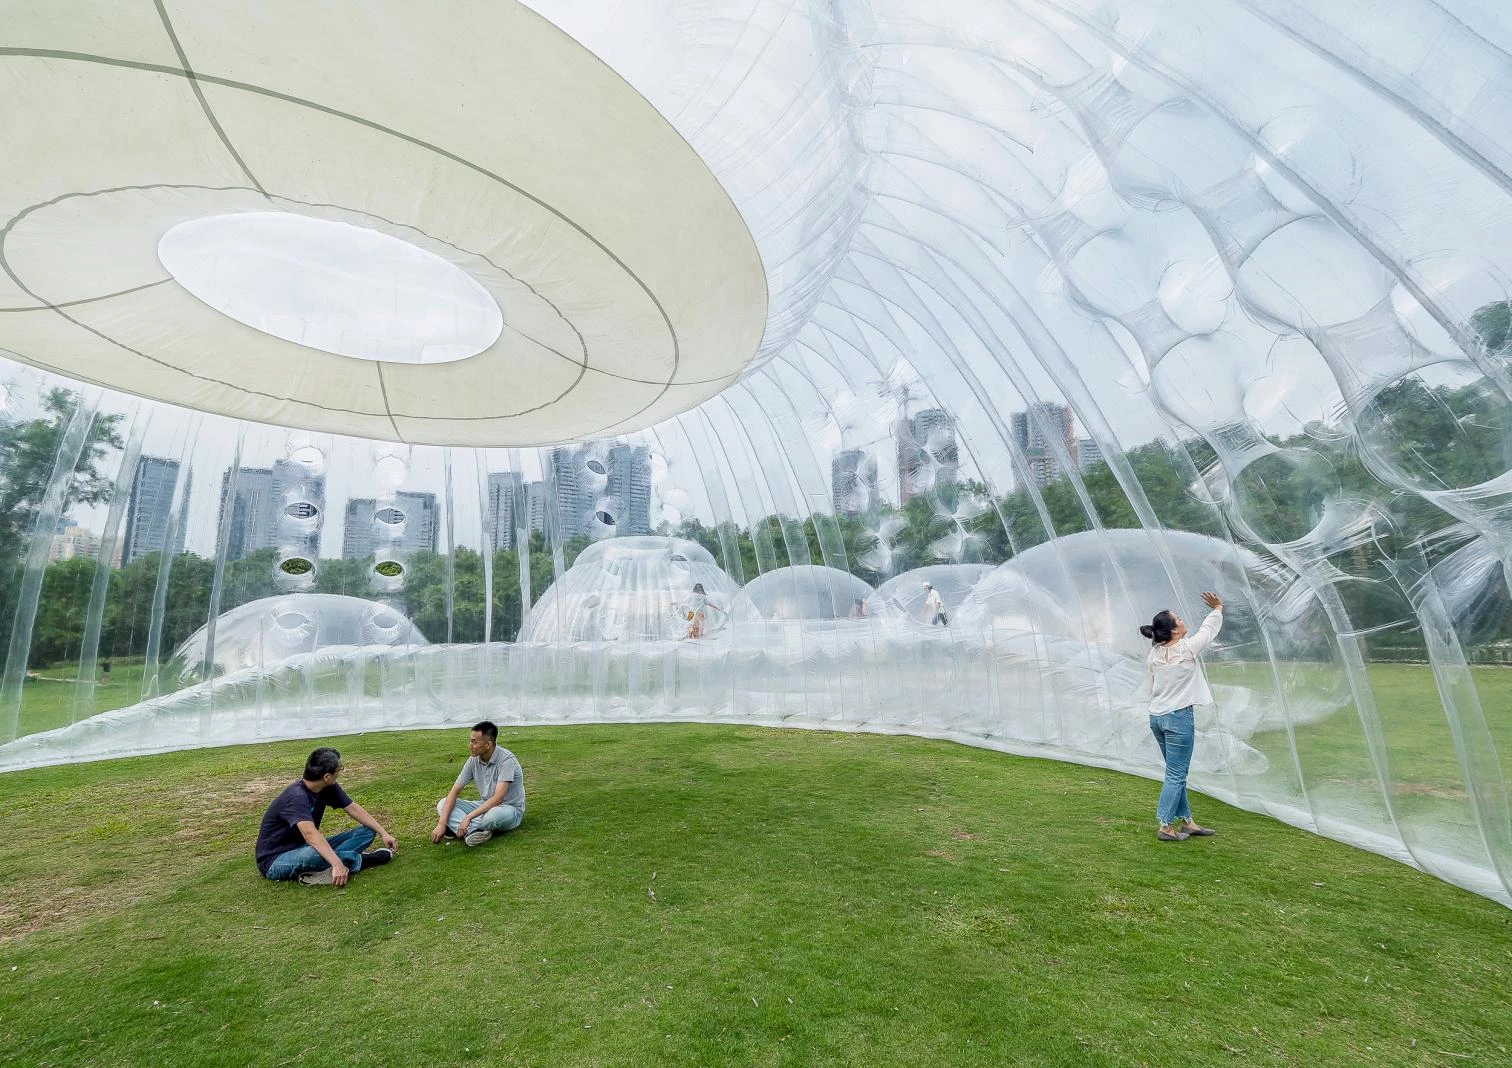 Pabellón inflable Air Mountain Aether Architects FOTÓGRAFO Zhang Chao